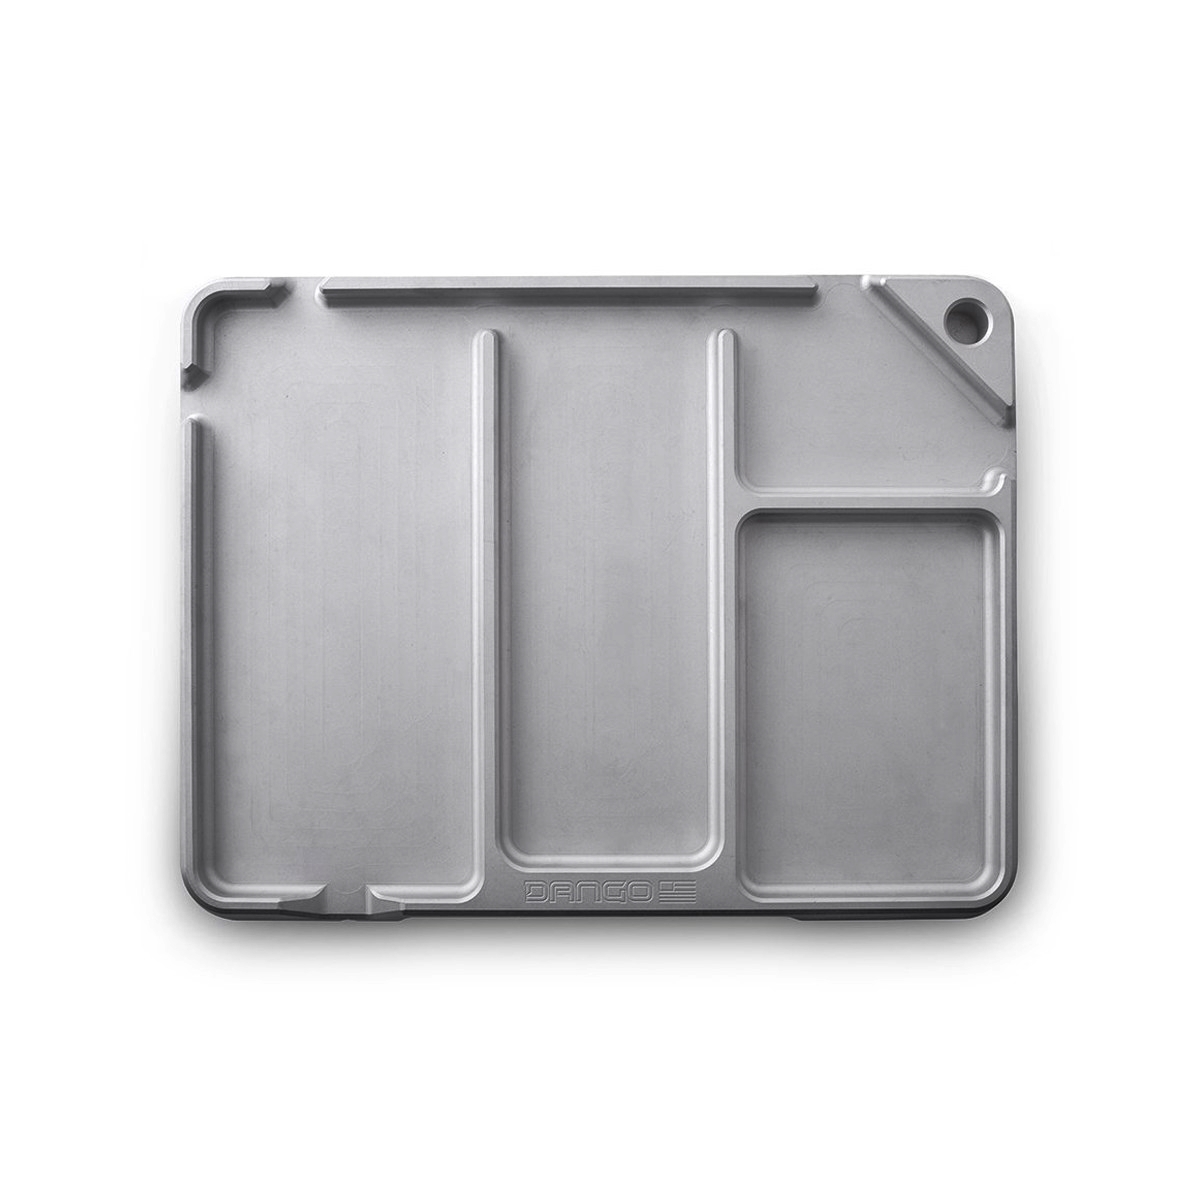 What Is An EDC Tray